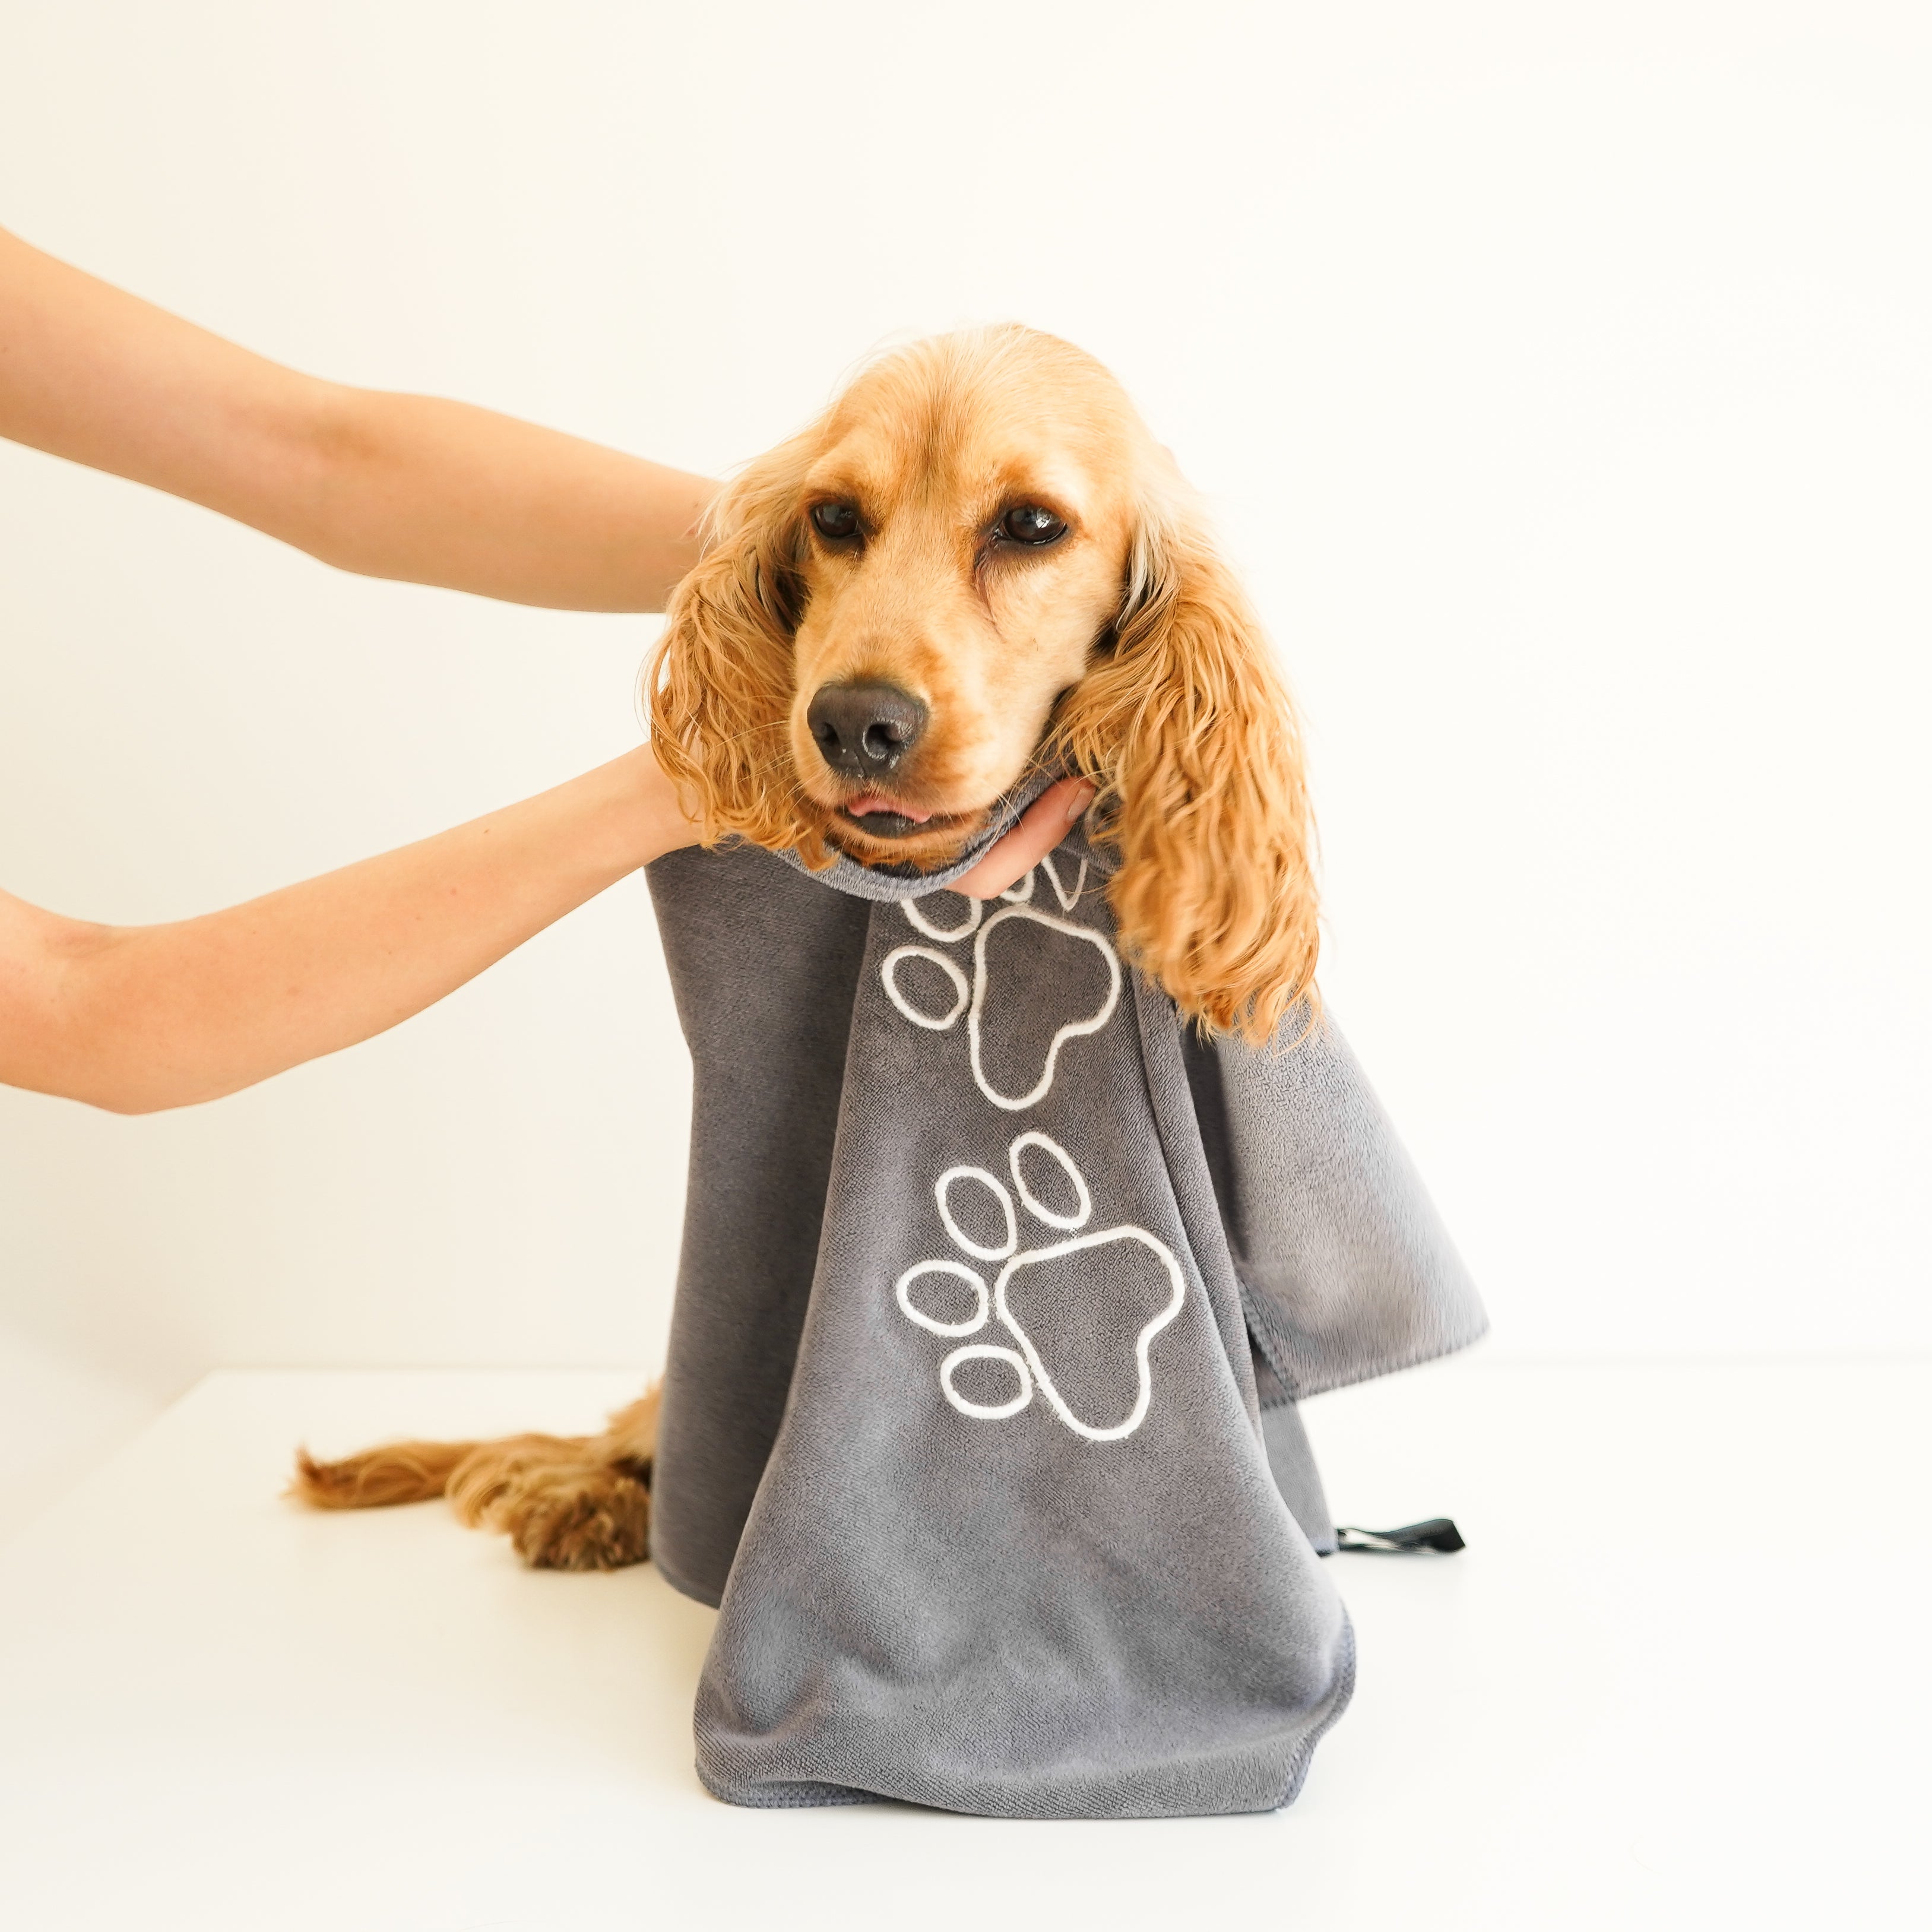 Why Pet Towel is a Perfect Gift for Pet Parents?